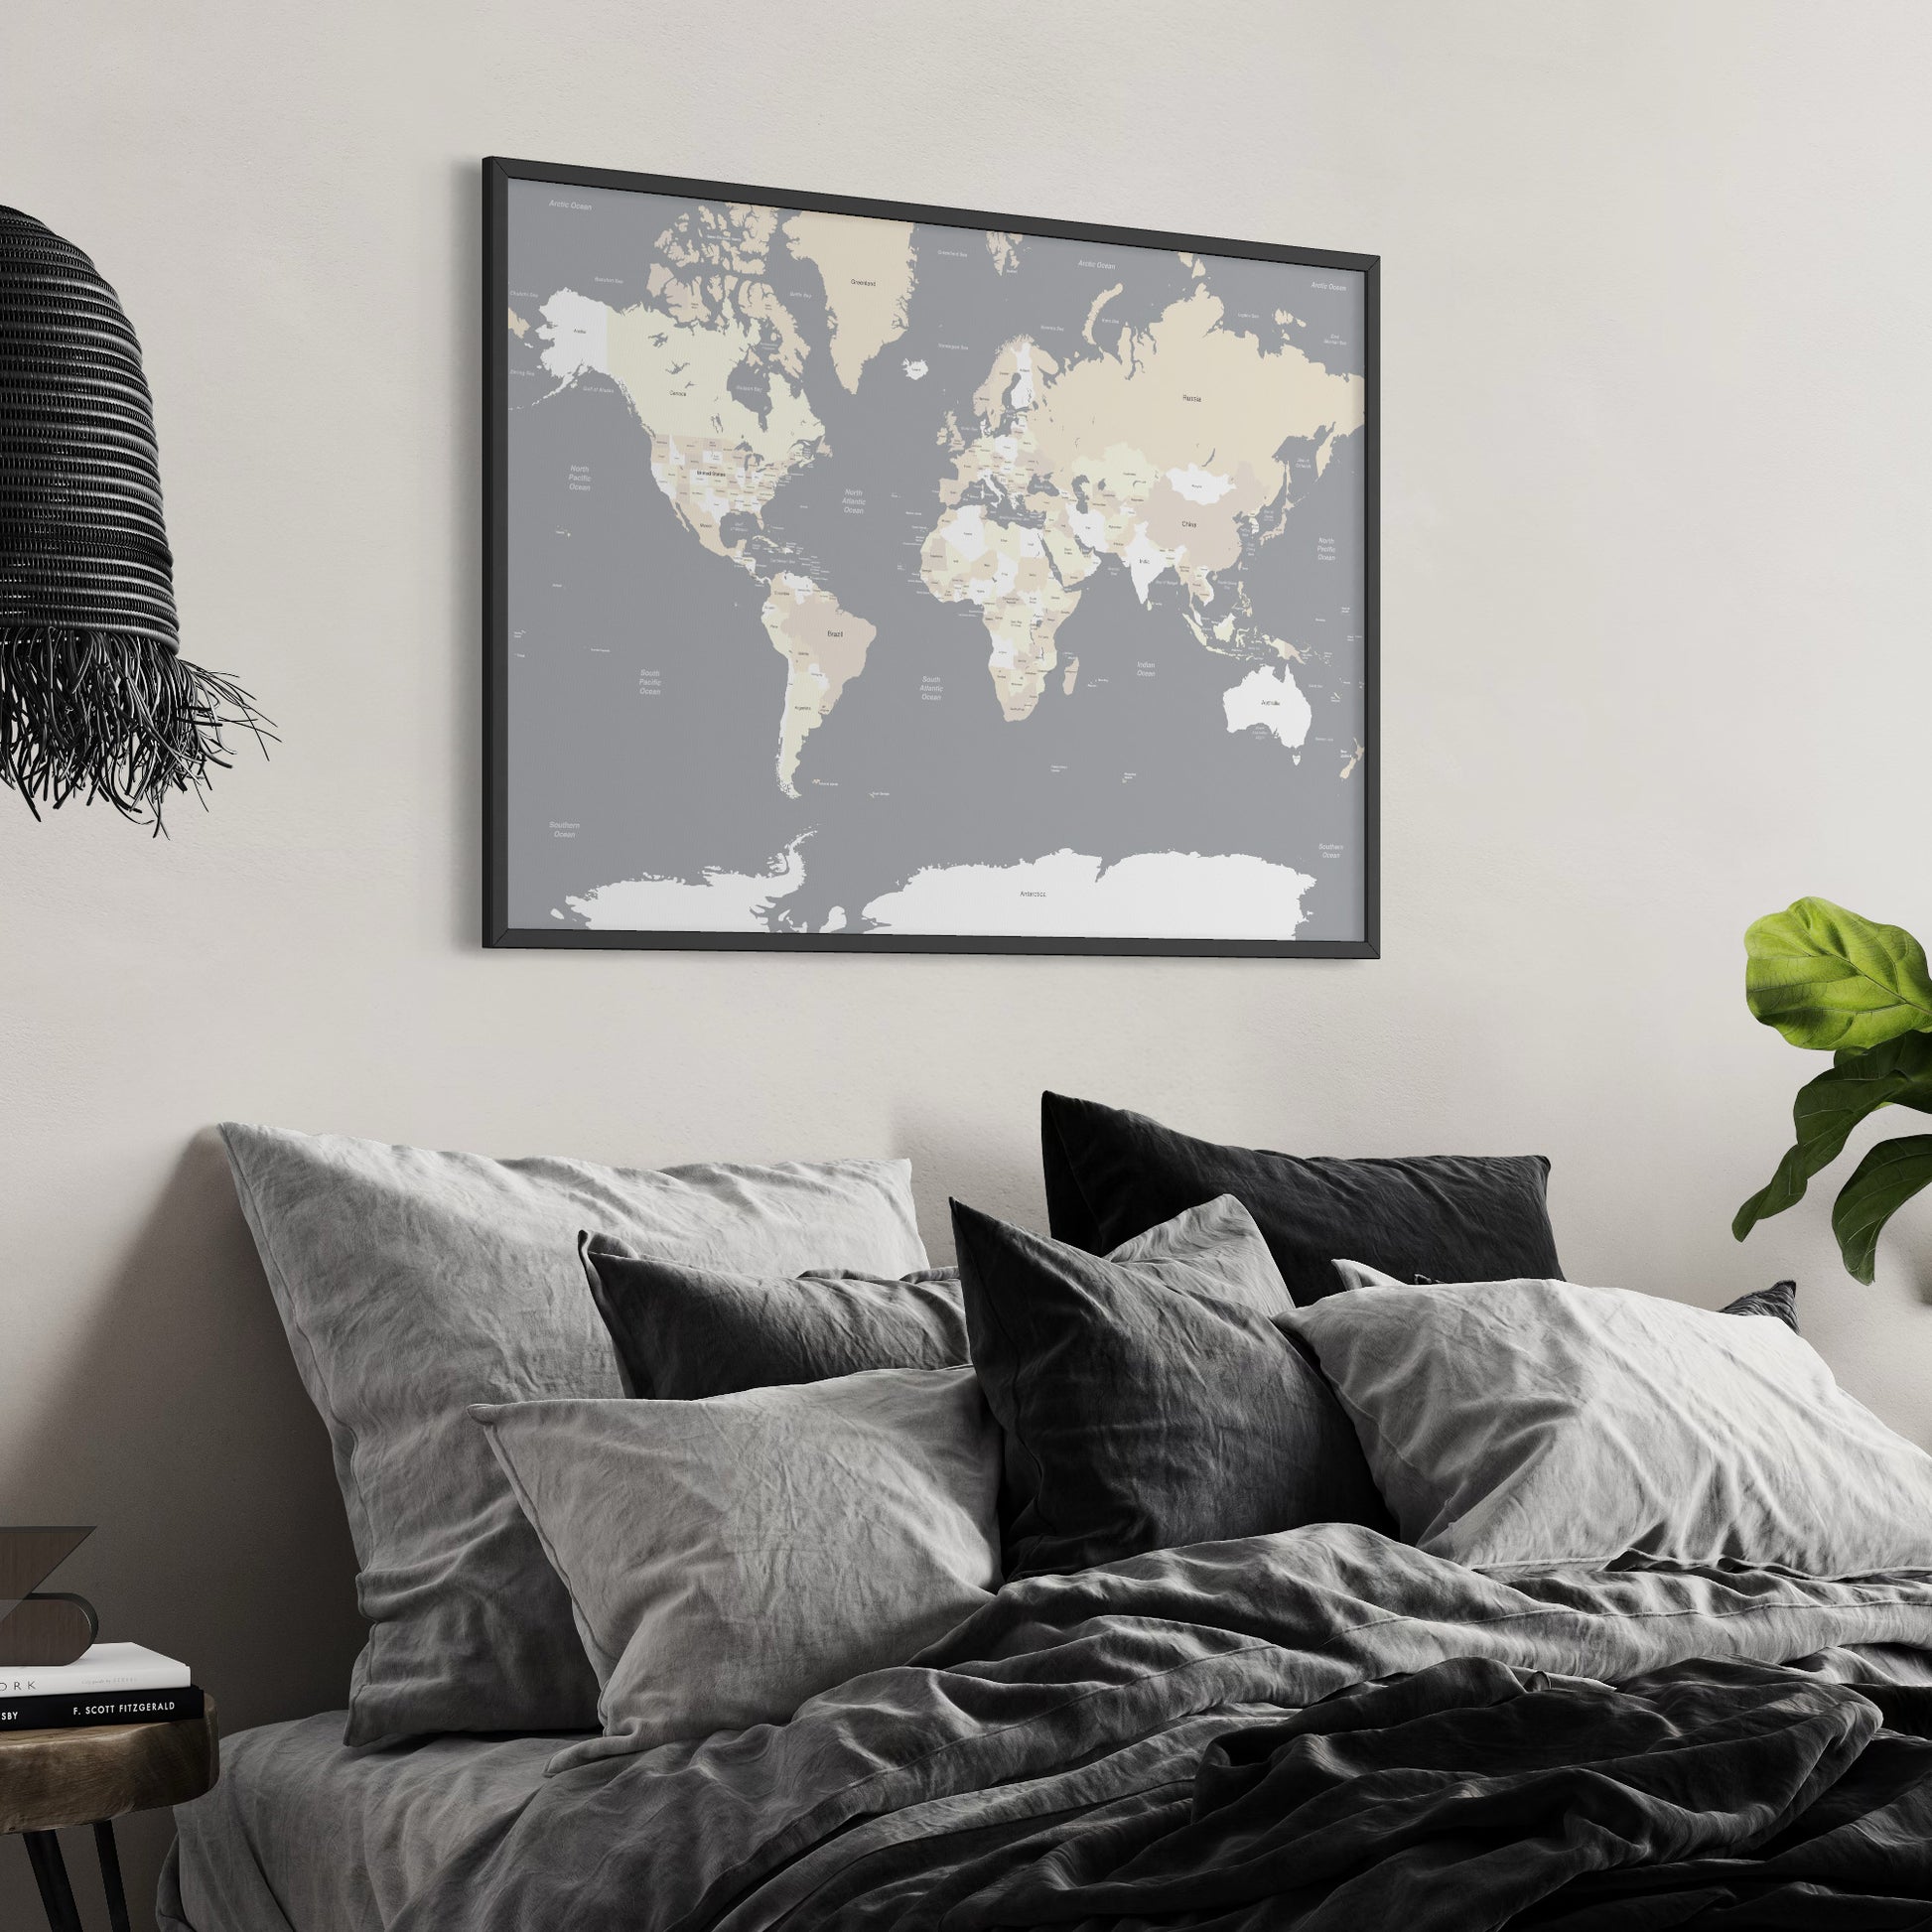 Grey Earthy Tones Map of the World on Wall Above Bed